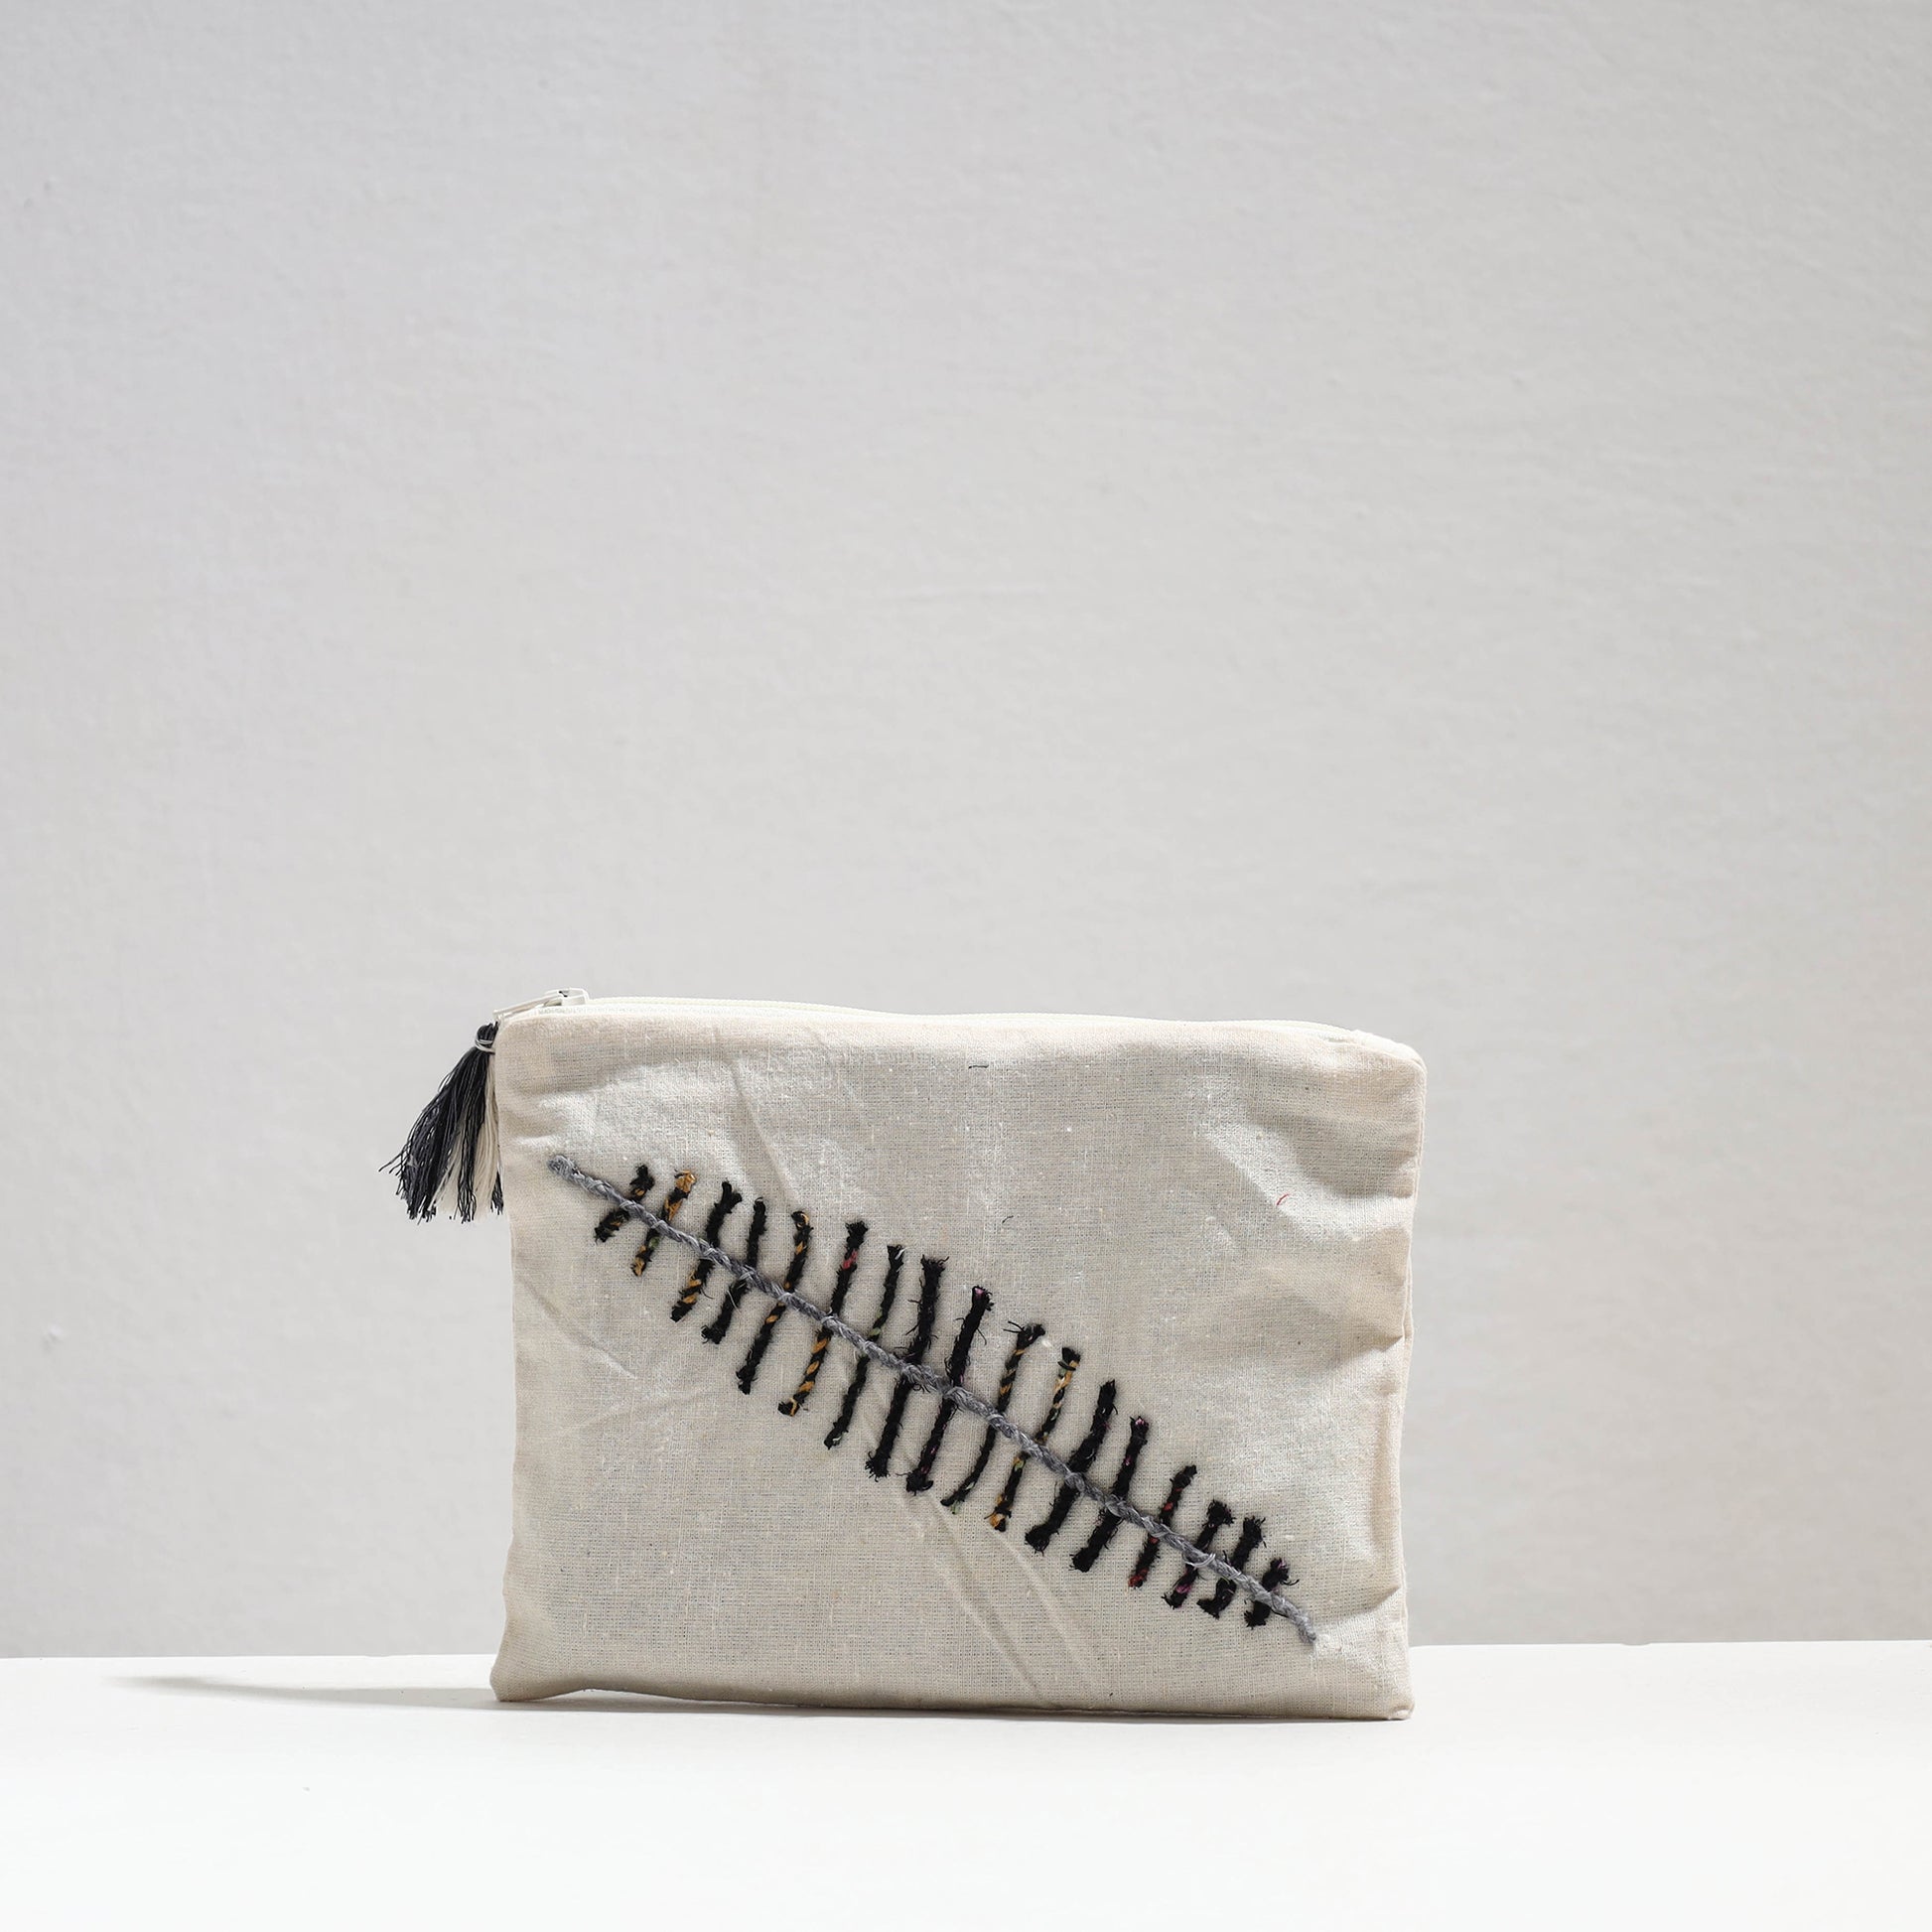 Cotton Cosmetic Pouch
